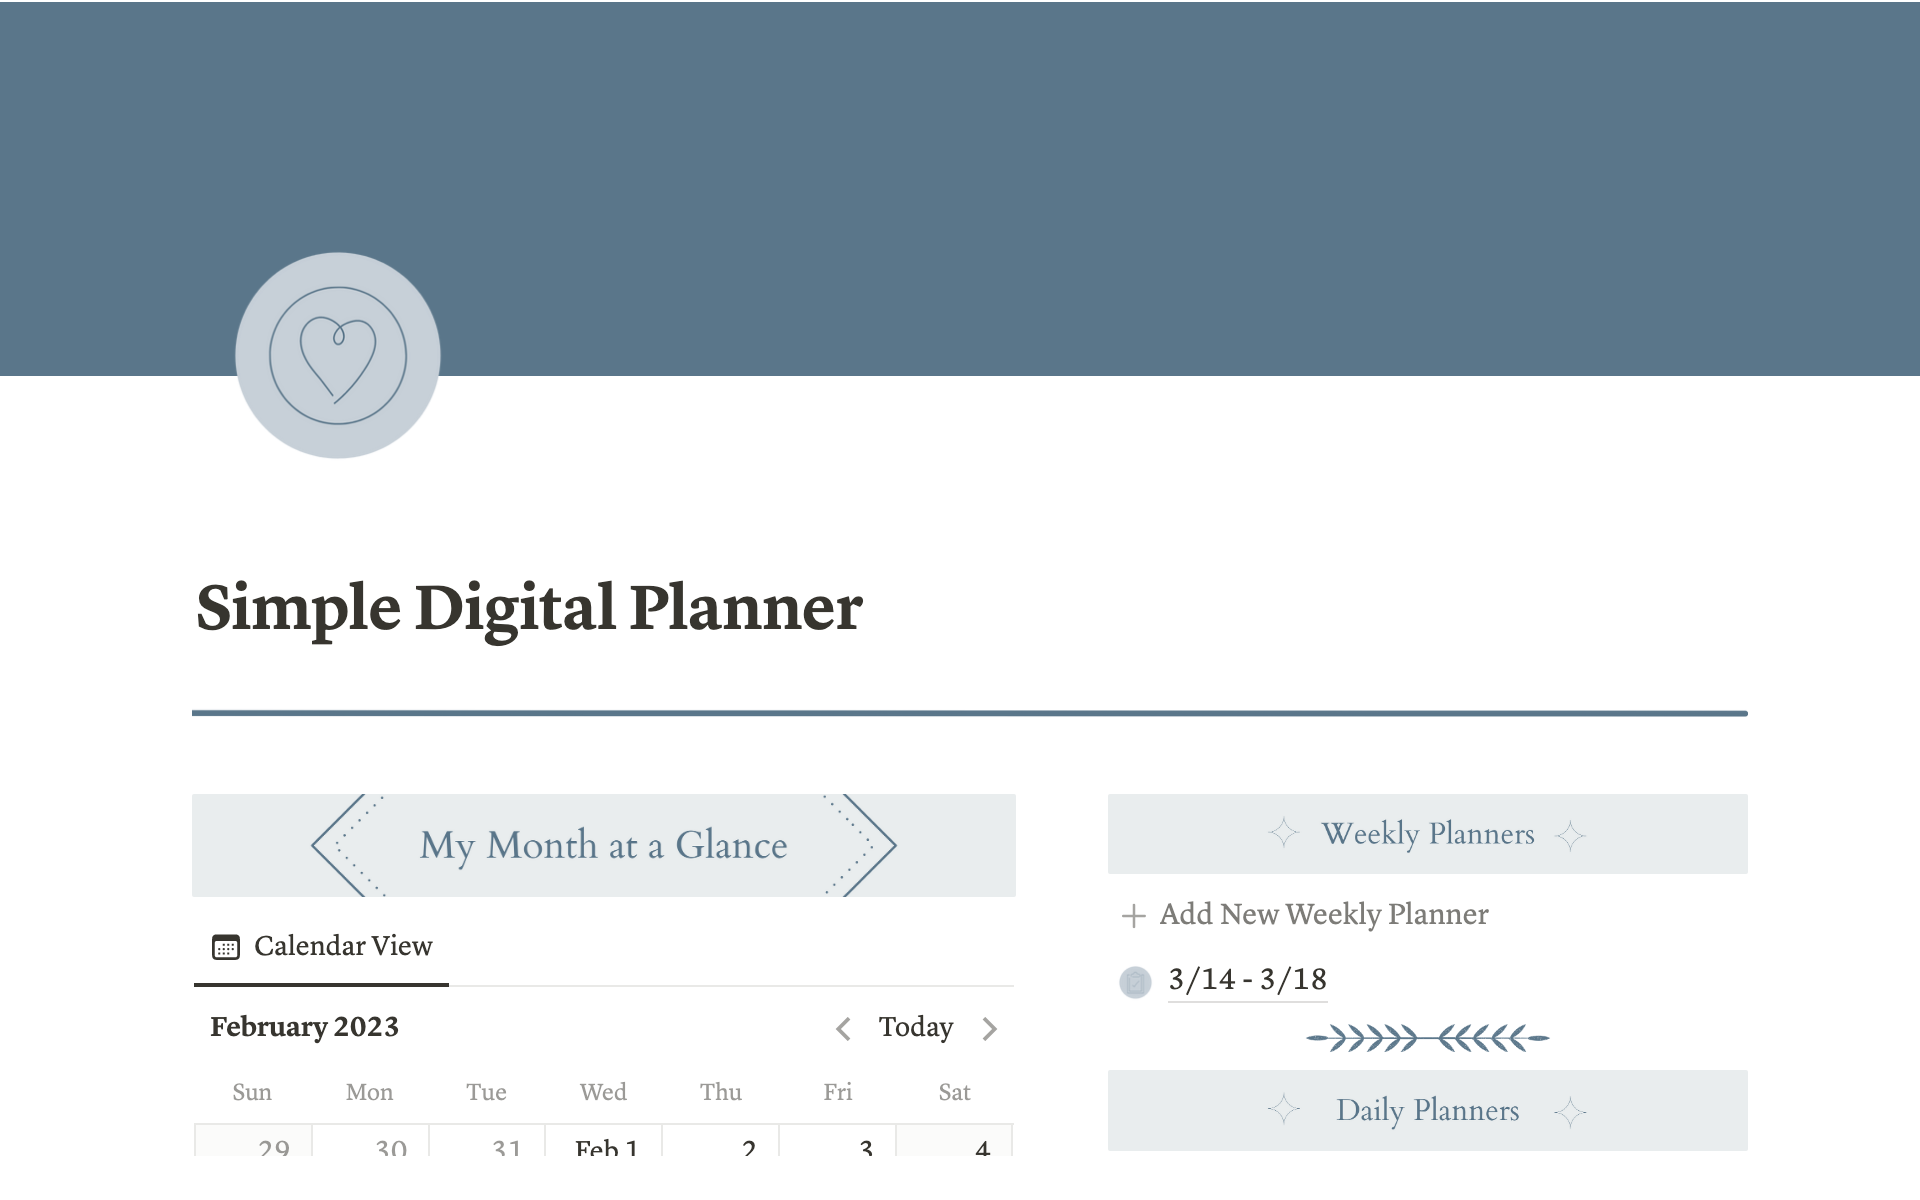 Plan your days, weeks and months with this simple digital planner.